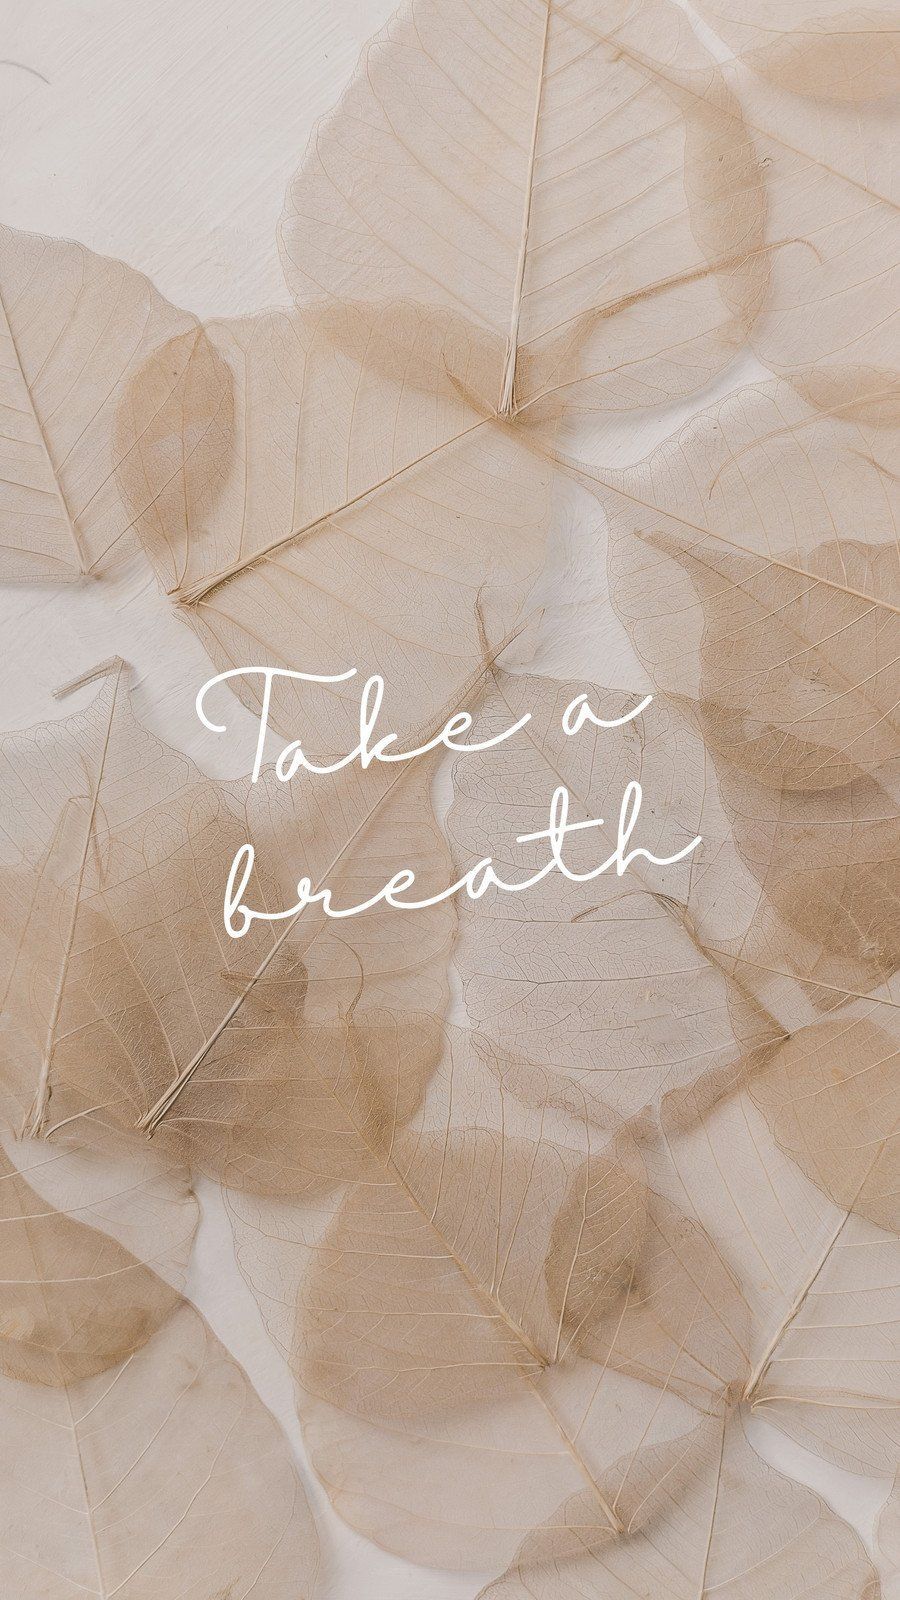 Take a breath, phone wallpaper, quote, leaves, beige, free - Android, white, One Piece, fashion, beige, design, feathers, simple, angels, gold, cute white, breathe, paper, pattern, minimalist, phone, quotes